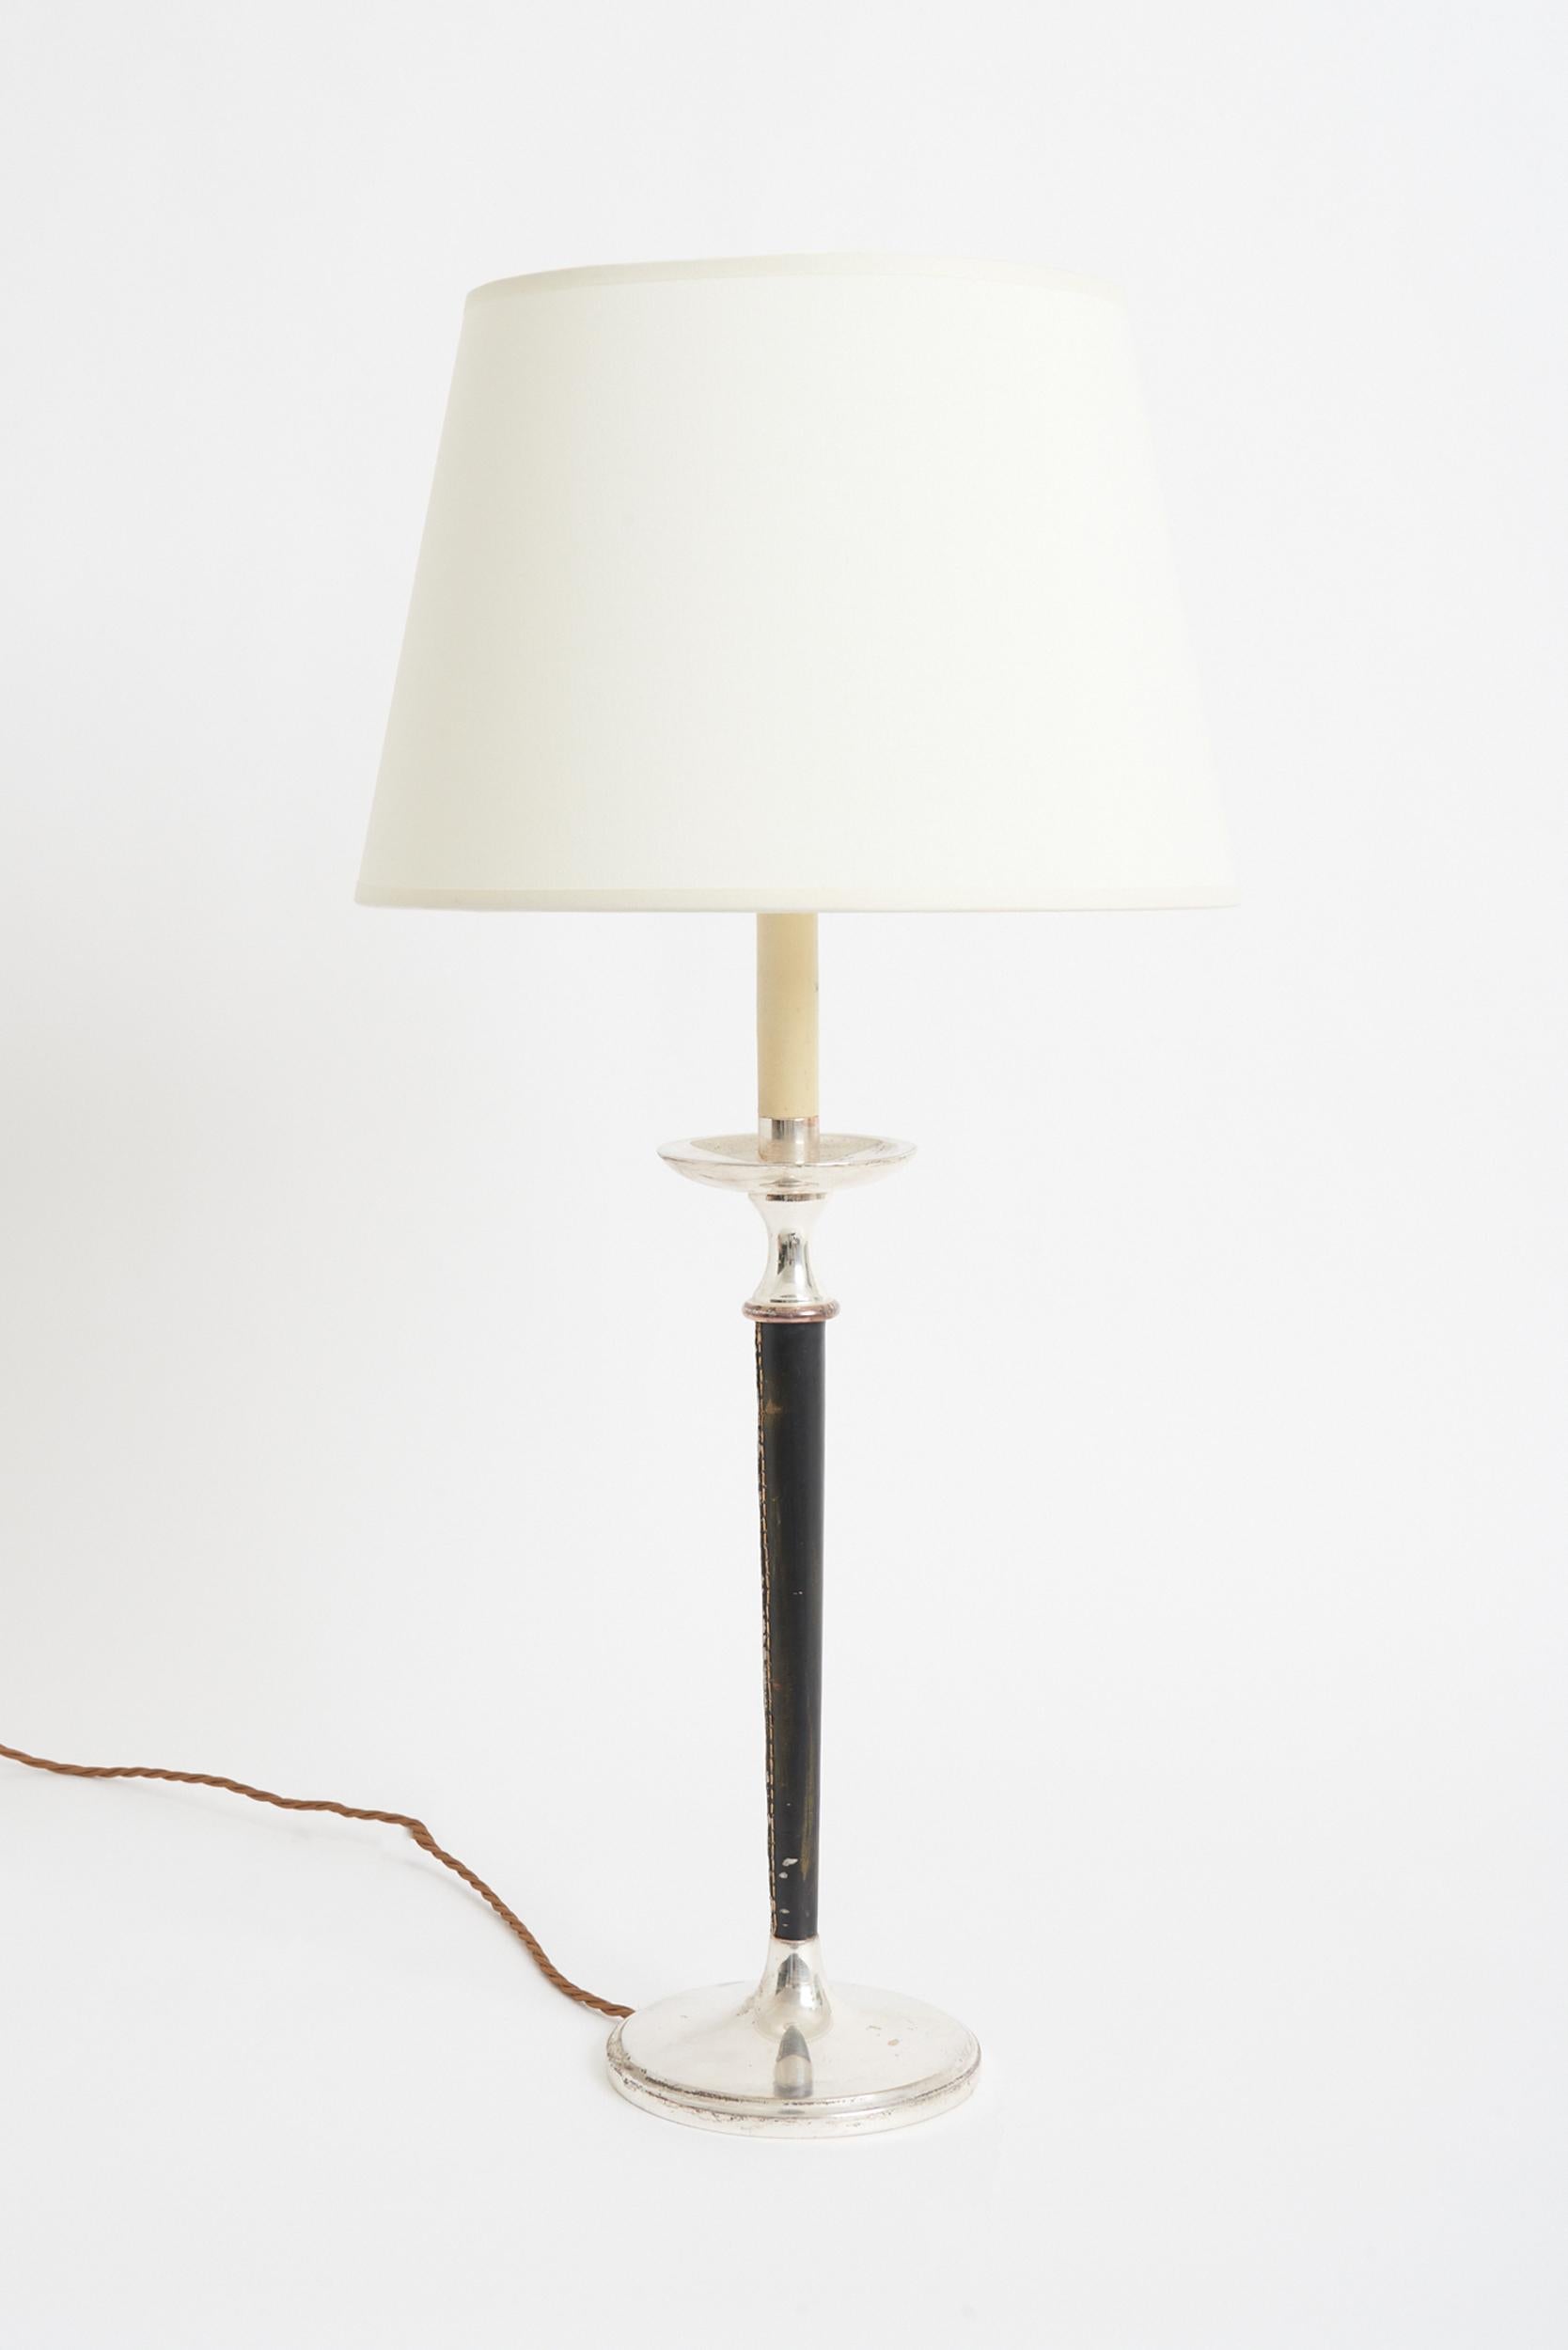 A black leather and silver plated table lamp.
France, third quarter of the 20th century.
With the shade: 73 cm high by 35.5 cm diameter
Lamp base only: 55 cm high by 16 cm diameter.